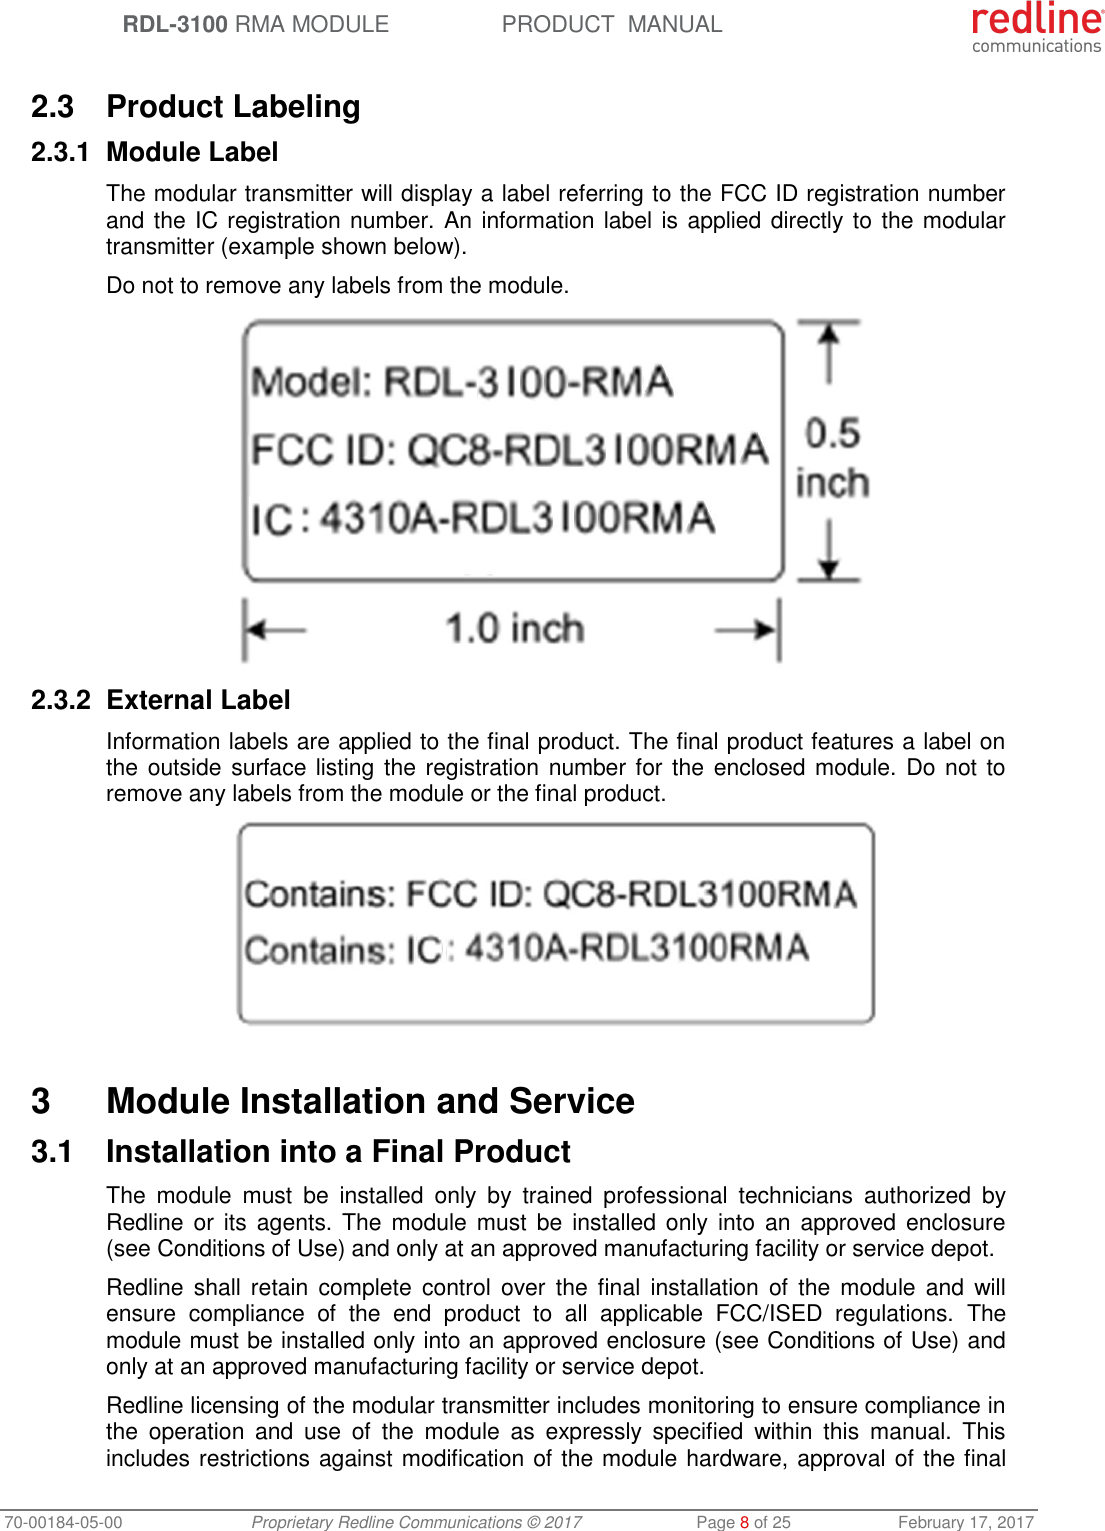  RDL-3100 RMA MODULE PRODUCT  MANUAL 70-00184-05-00 Proprietary Redline Communications © 2017  Page 8 of 25  February 17, 2017  2.3  Product Labeling 2.3.1  Module Label The modular transmitter will display a label referring to the FCC ID registration number and the IC registration number. An information label is applied directly to the modular transmitter (example shown below). Do not to remove any labels from the module.  2.3.2  External Label Information labels are applied to the final product. The final product features a label on the outside surface listing the registration number for the  enclosed module. Do not to remove any labels from the module or the final product.   3  Module Installation and Service 3.1  Installation into a Final Product The  module  must  be  installed  only  by  trained  professional  technicians  authorized  by Redline or  its  agents. The  module must  be installed only  into an  approved enclosure (see Conditions of Use) and only at an approved manufacturing facility or service depot. Redline shall  retain  complete  control  over  the final  installation of  the  module  and  will ensure  compliance  of  the  end  product  to  all  applicable  FCC/ISED  regulations.  The module must be installed only into an approved enclosure (see Conditions of Use) and only at an approved manufacturing facility or service depot. Redline licensing of the modular transmitter includes monitoring to ensure compliance in the  operation  and  use  of  the  module  as  expressly  specified  within  this  manual.  This includes restrictions against modification of the module hardware, approval of the final 